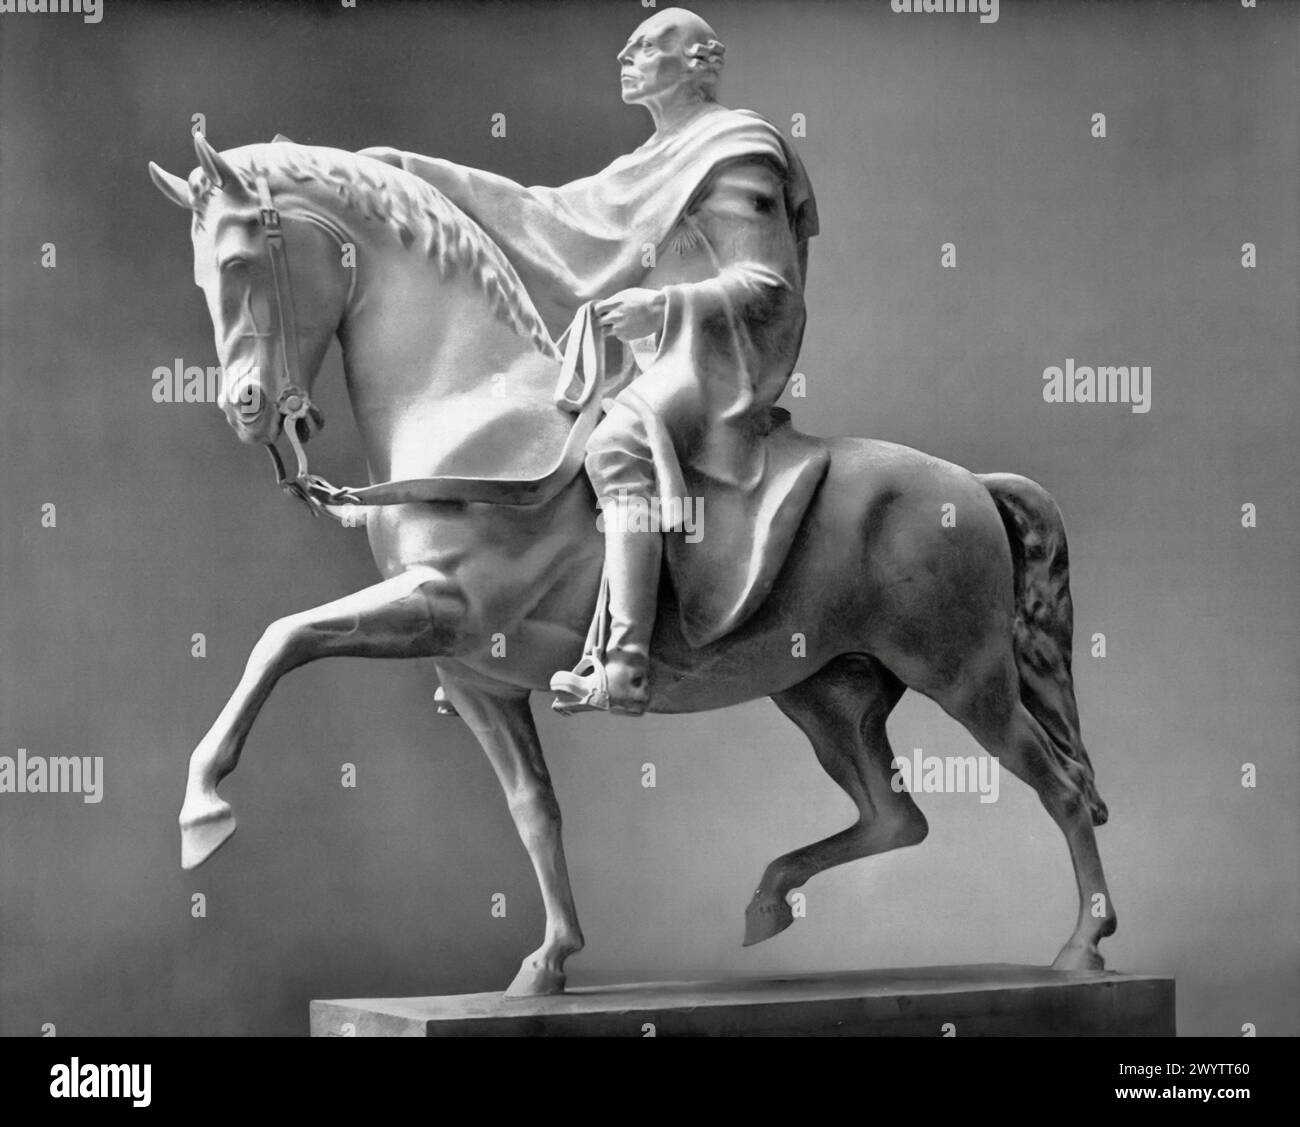 The Royal Rider' a sculpture by Josef Thorak, dated circa 1943, serves as a example of World War II propaganda, reflecting Nazi ideology with its themes of strength and tradition. The piece features a figure on horseback, resembling Thorak himself. Stock Photo